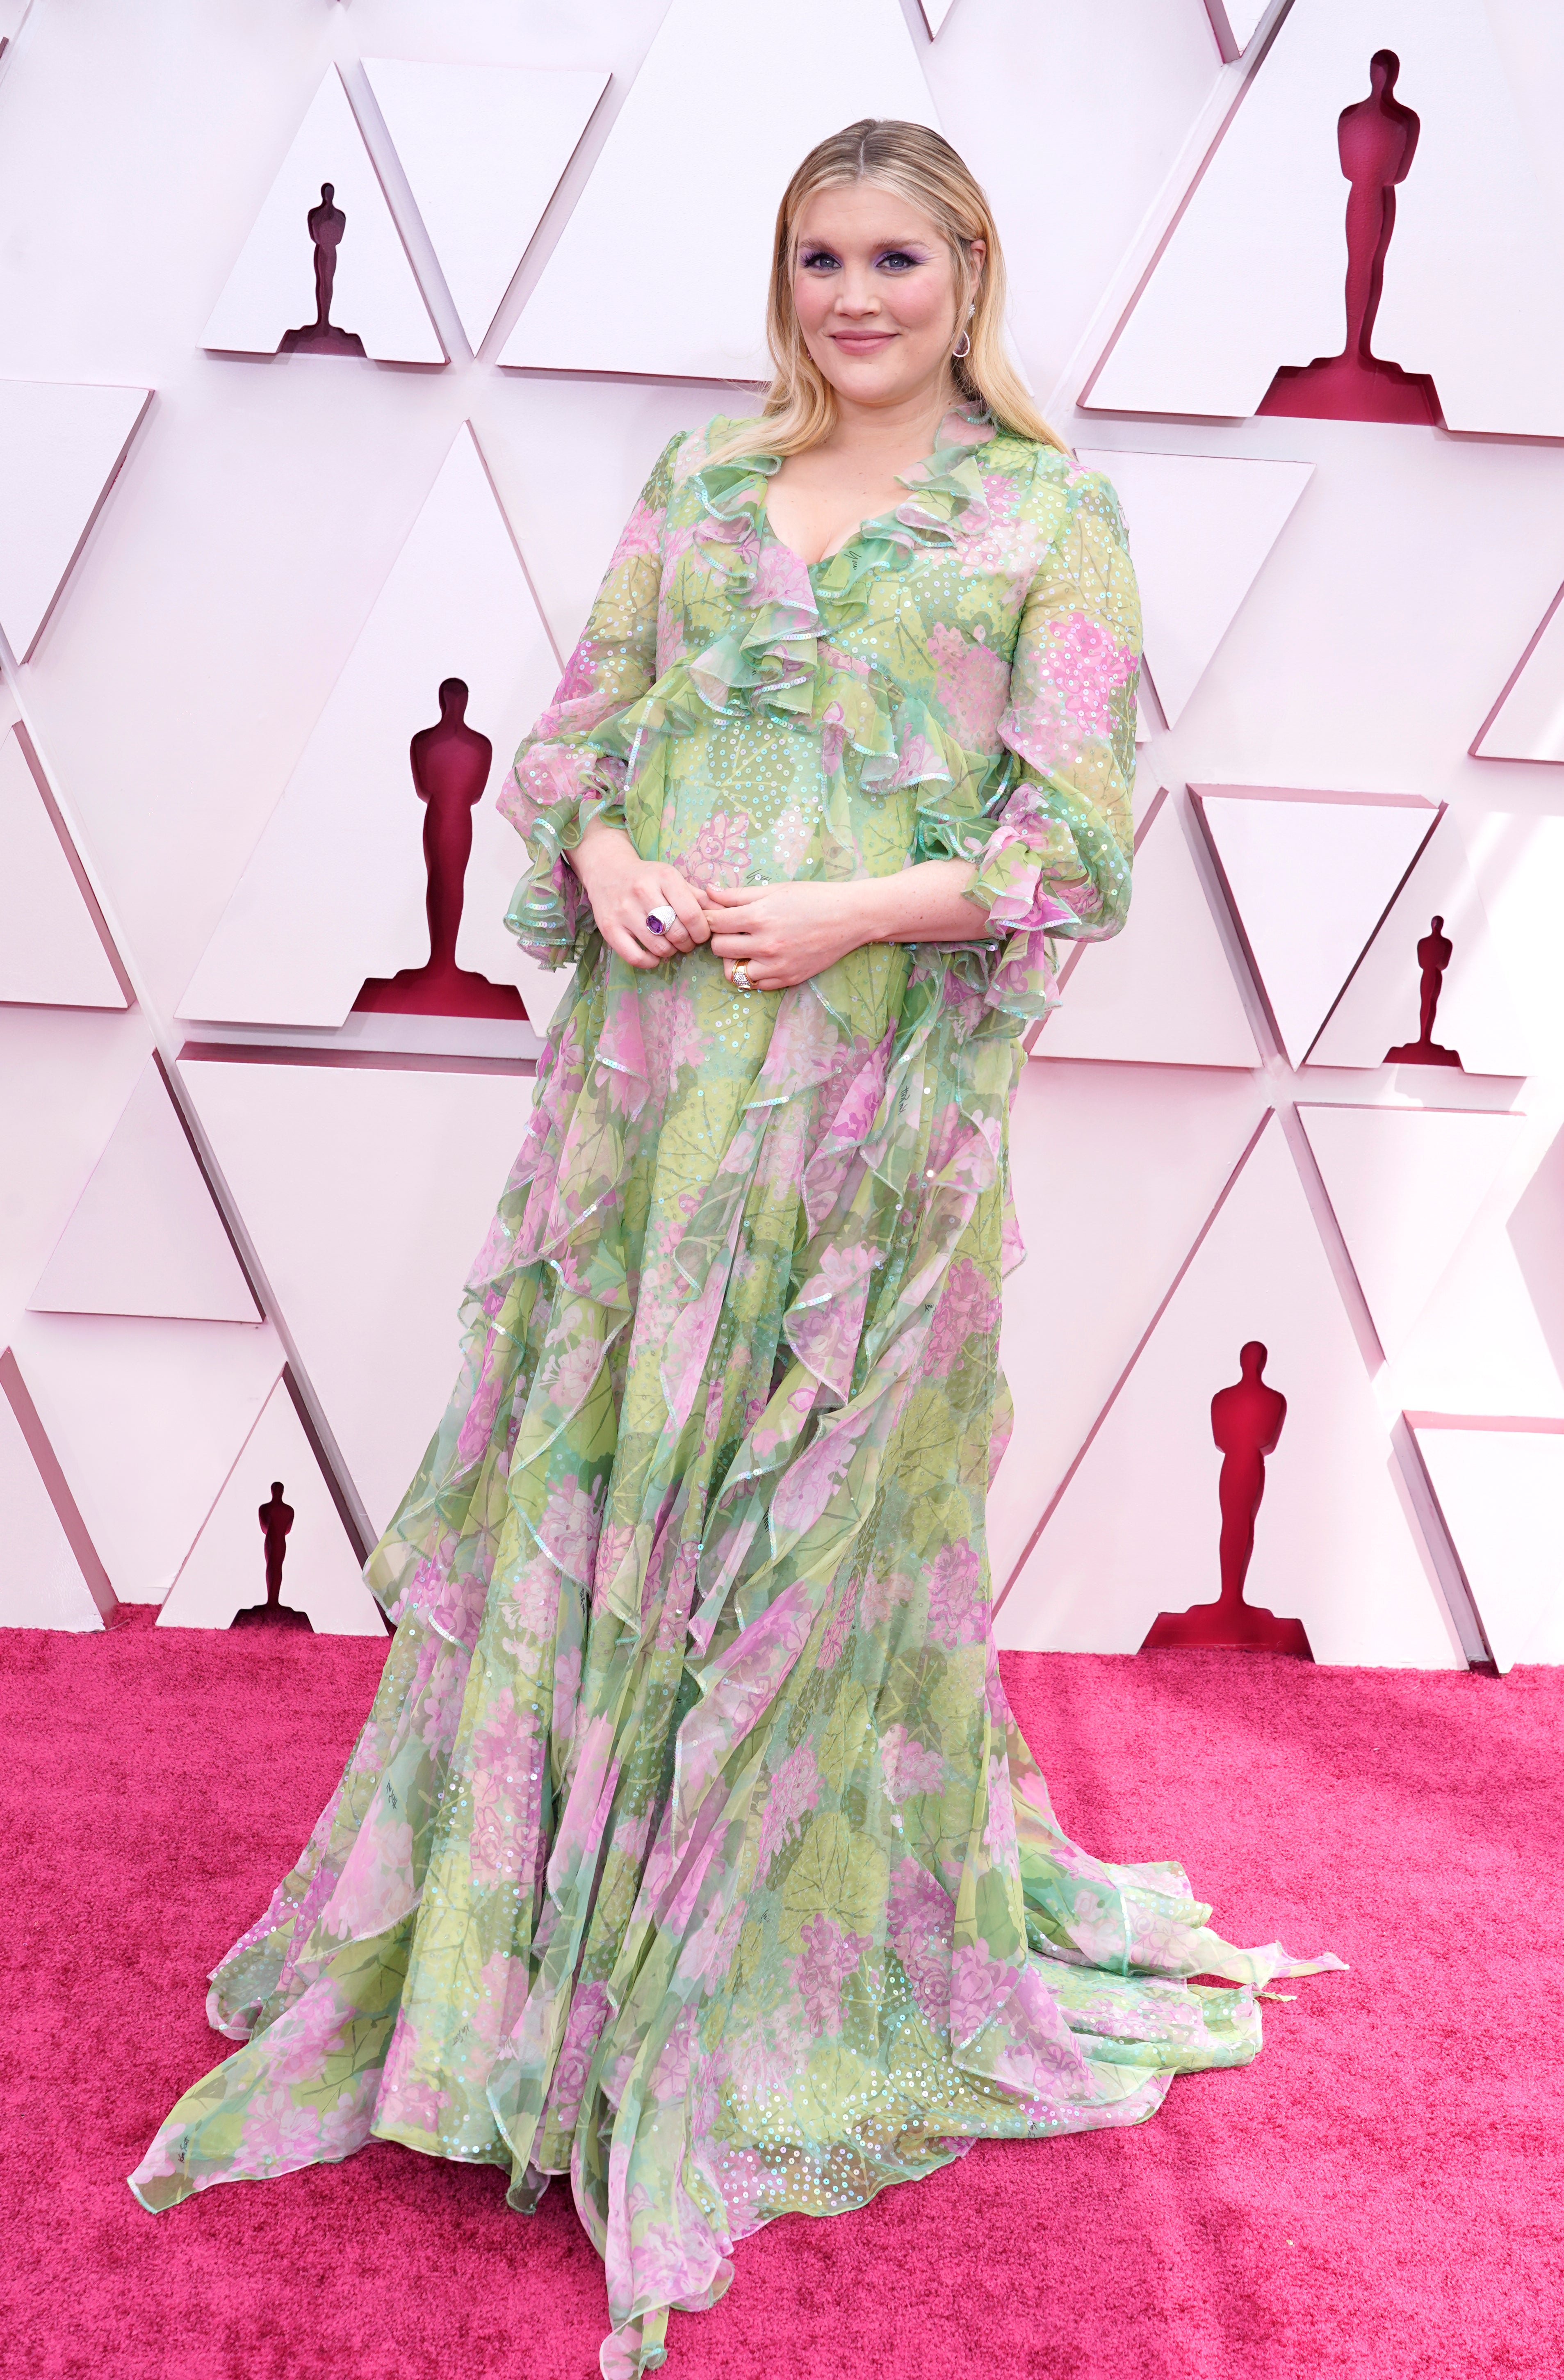 Emerald Fennell at the 93rd Academy Awards